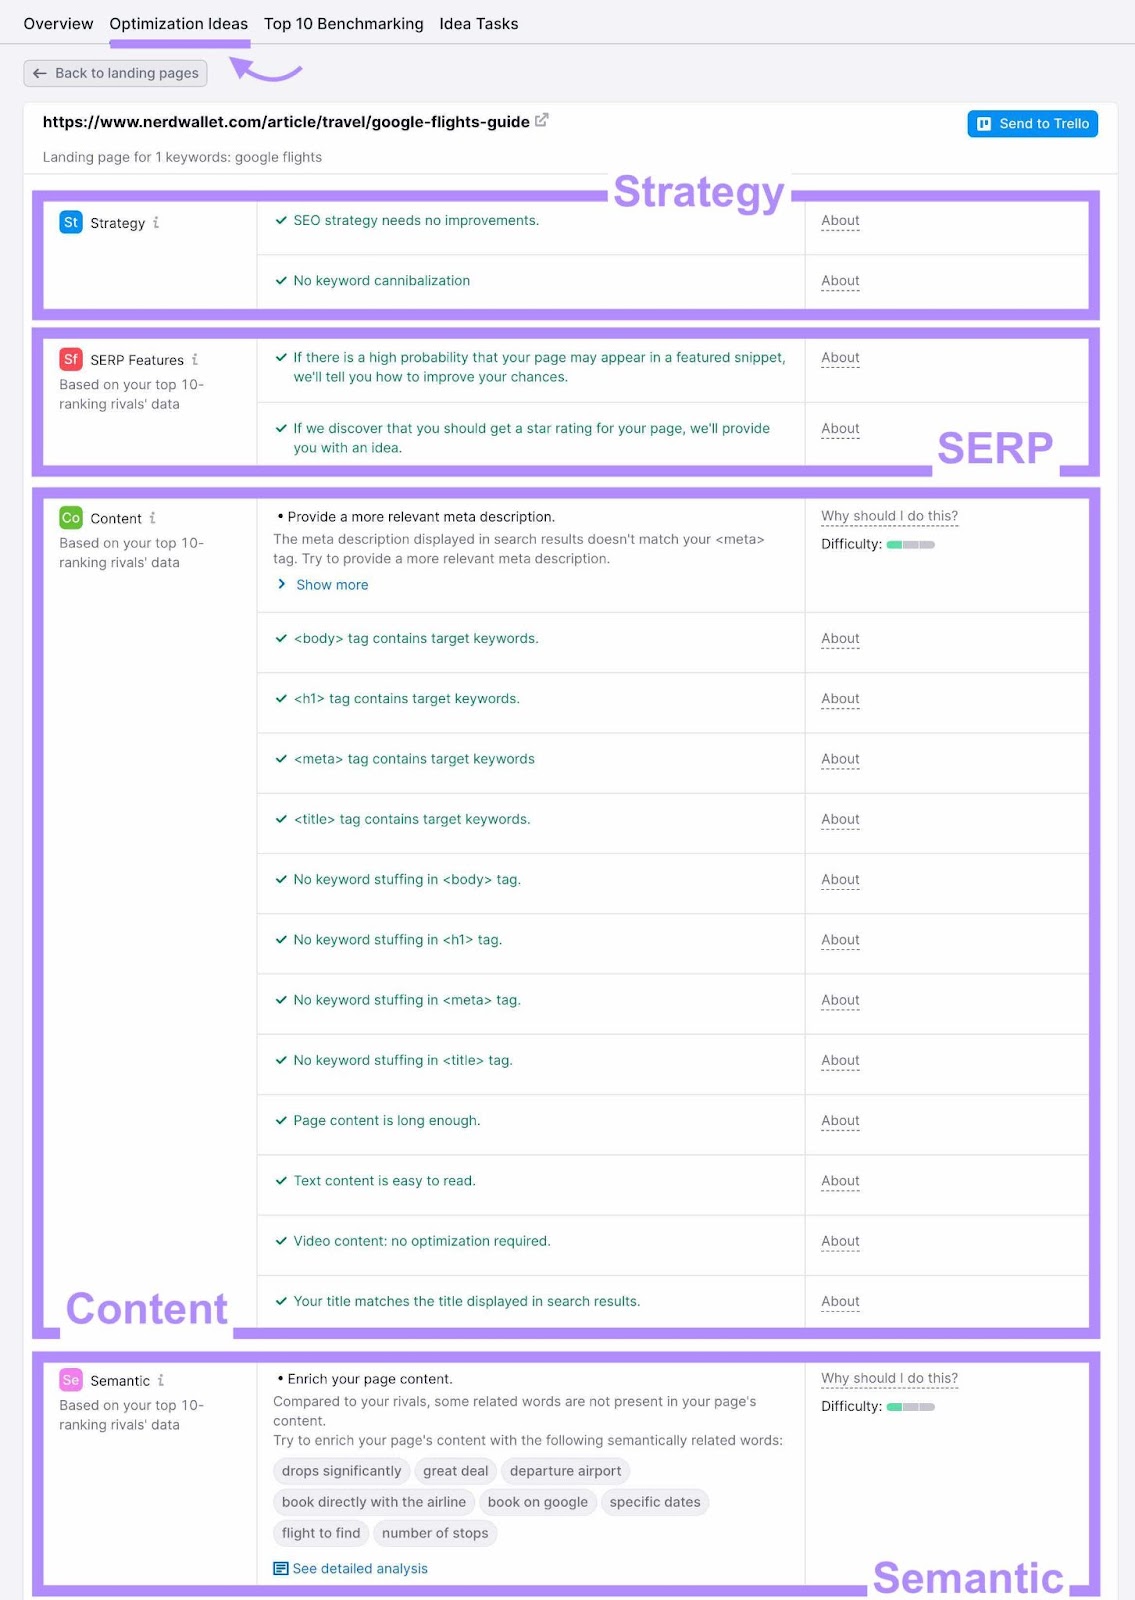 "Strategy," "SERP," "Content," and "Semantic" sections highlighted under "Optimization Ideas" tab